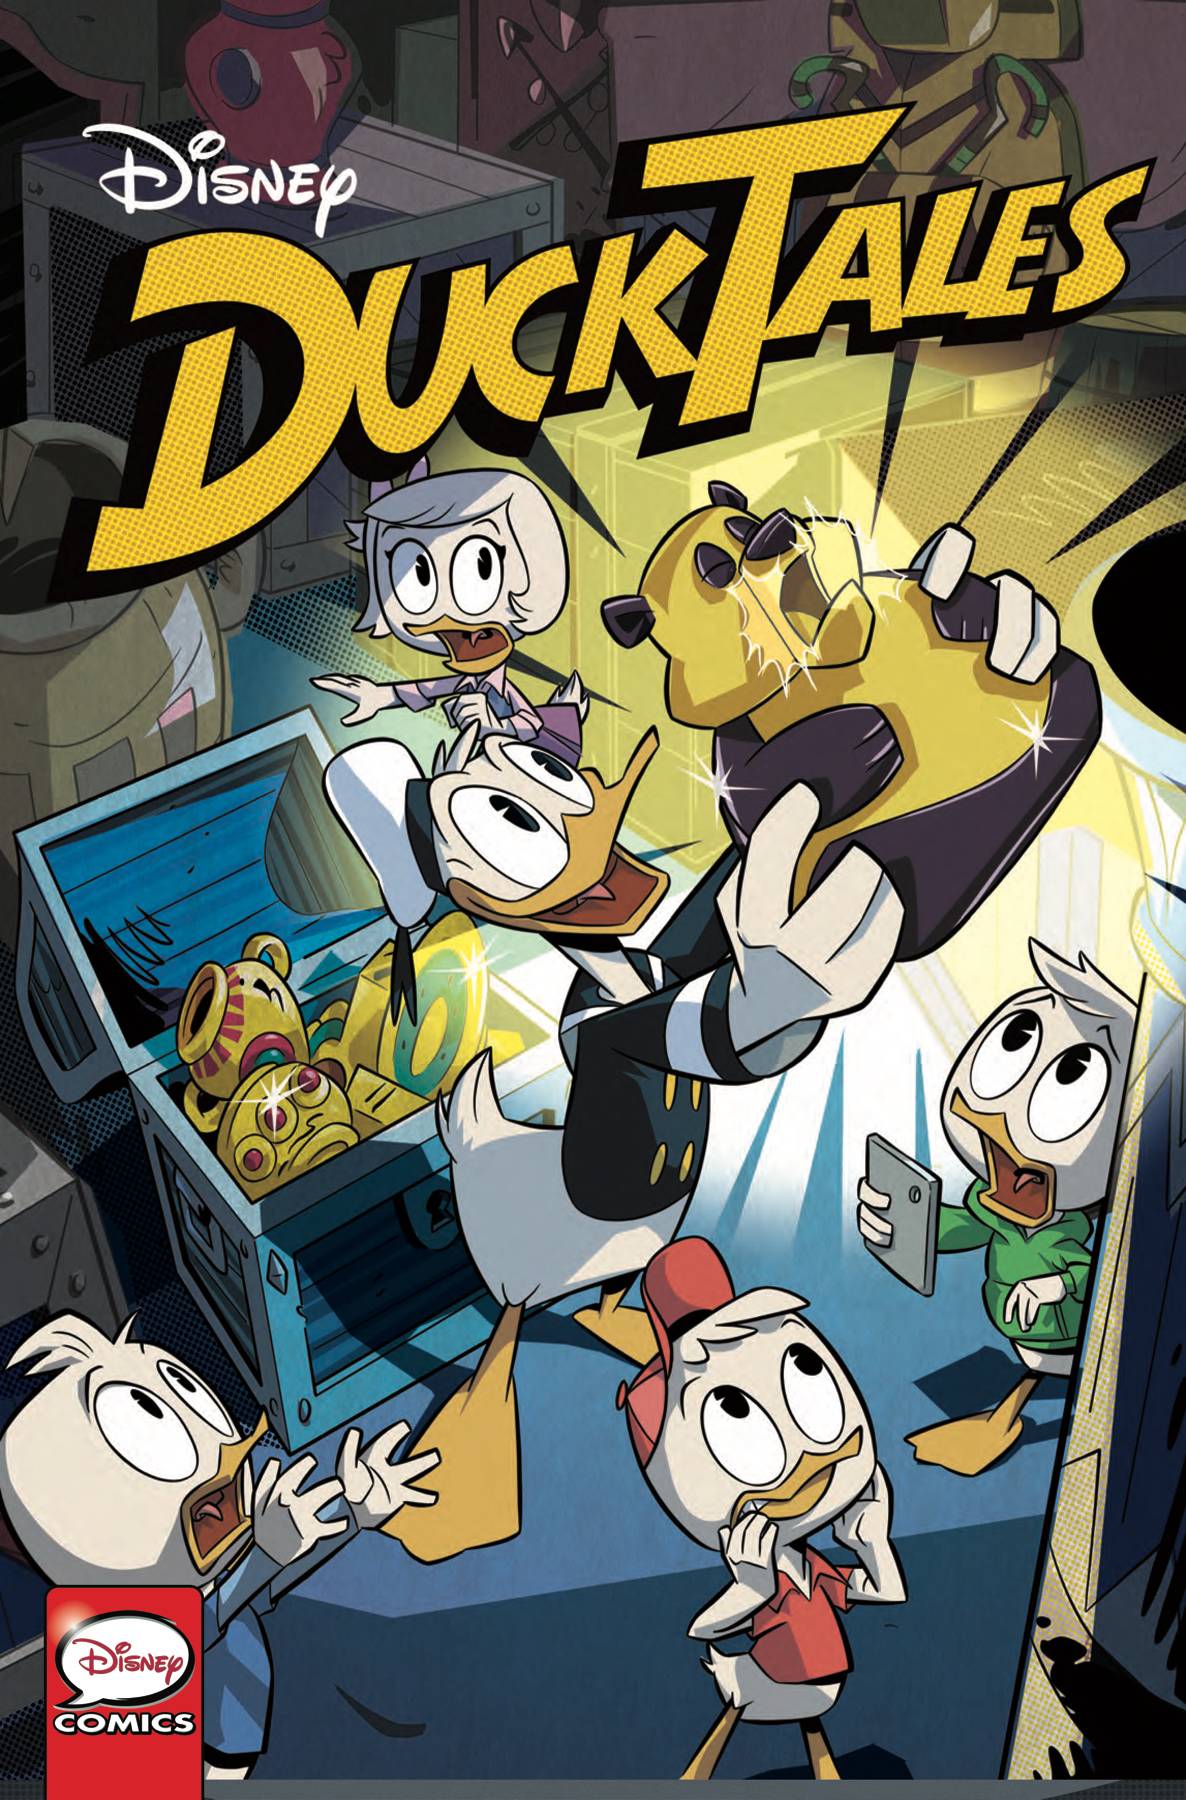 DUCKTALES SILENCE & SCIENCE #1 (OF 3) CVR A GHIGHLIONE